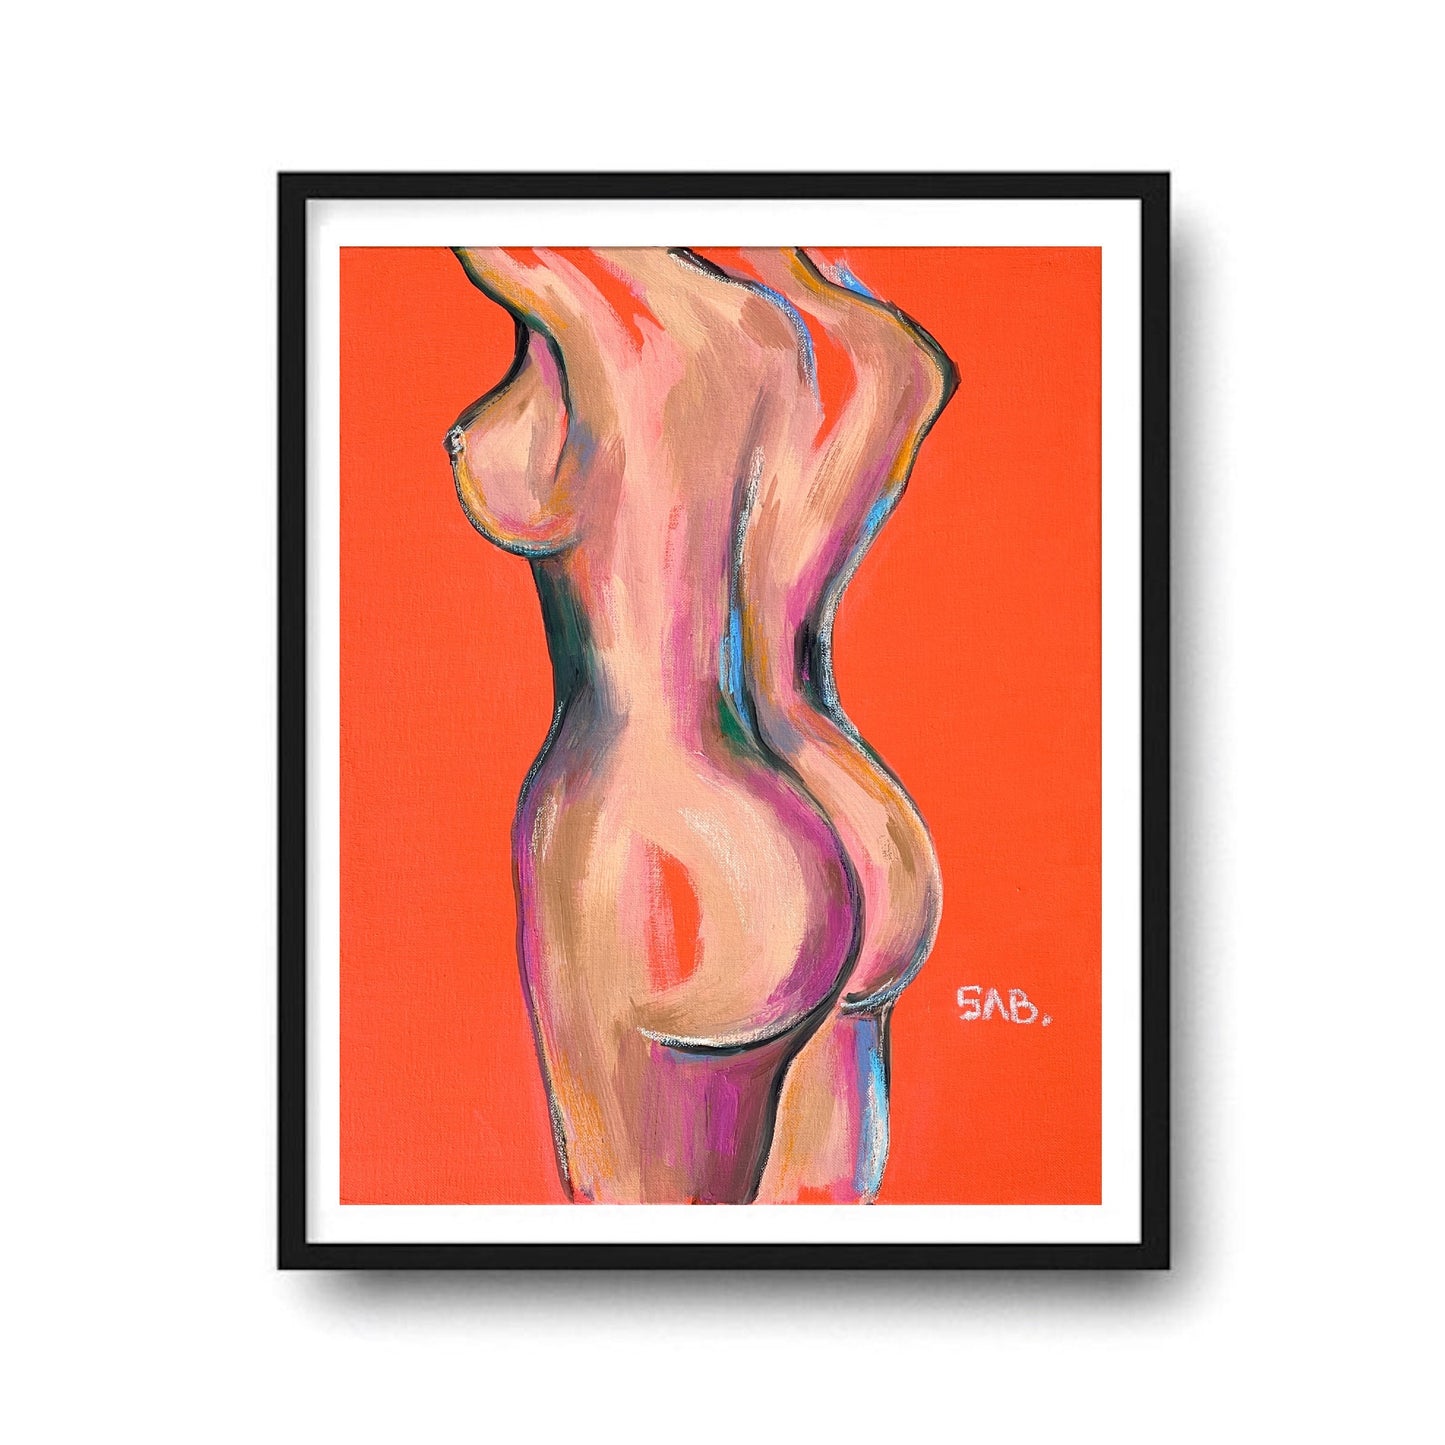 Female Figurative Nude sexy Colorful canvas painting art 16x20 naked LGBTQ pride rainbow feminist wall bedroom decor acrylic lesbian